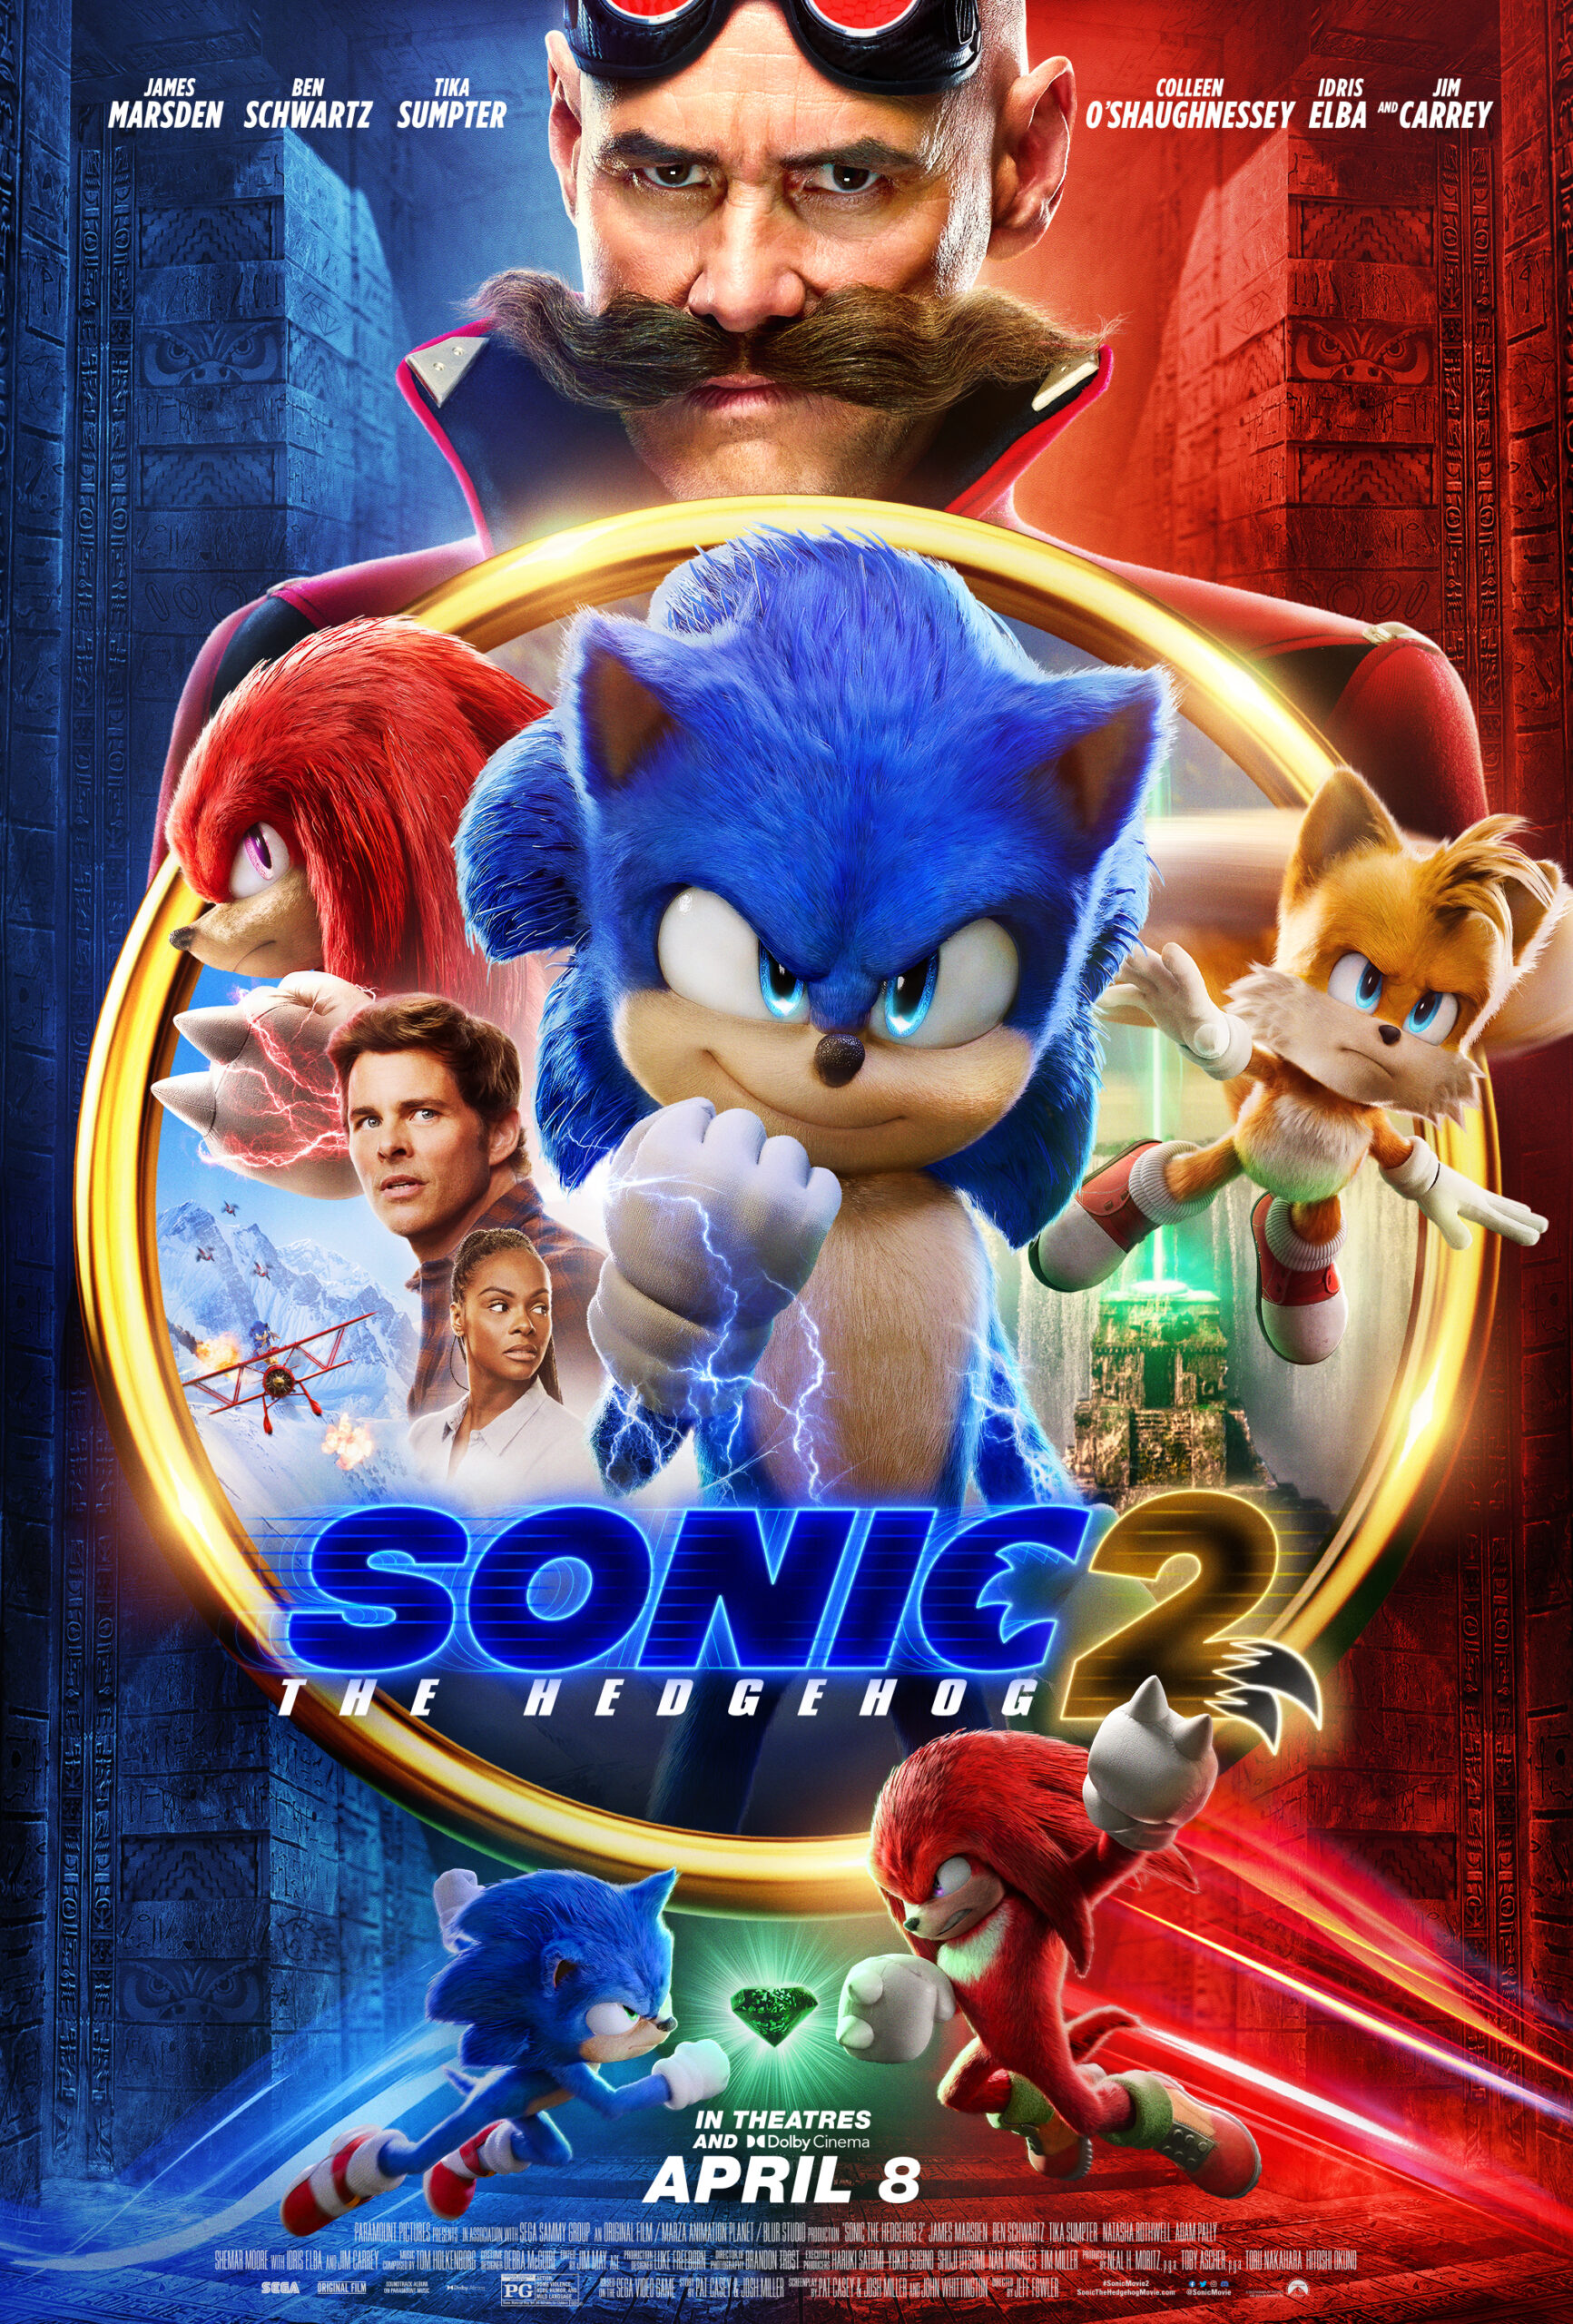 sonic-the-hedgehog-2-will-be-released-in-theater-april-8-japanup-magazine